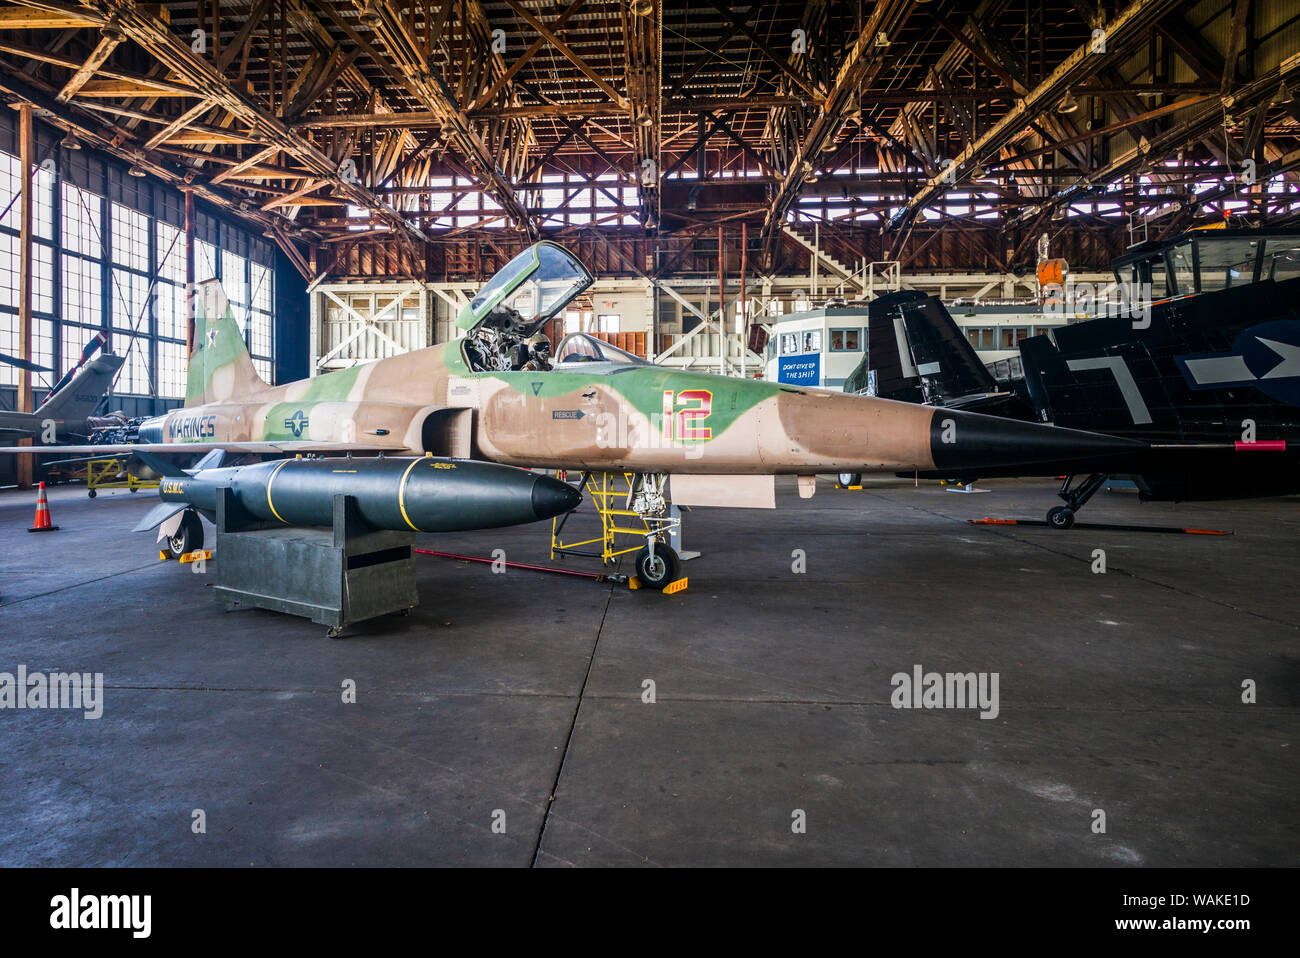 USA, New Jersey, Rio Grande. Naval Air Station Wildwood Aviation Museum, 1960's US Marines F-5 jet fighter painted in aggressor camouflage (Editorial Use Only) Stock Photo